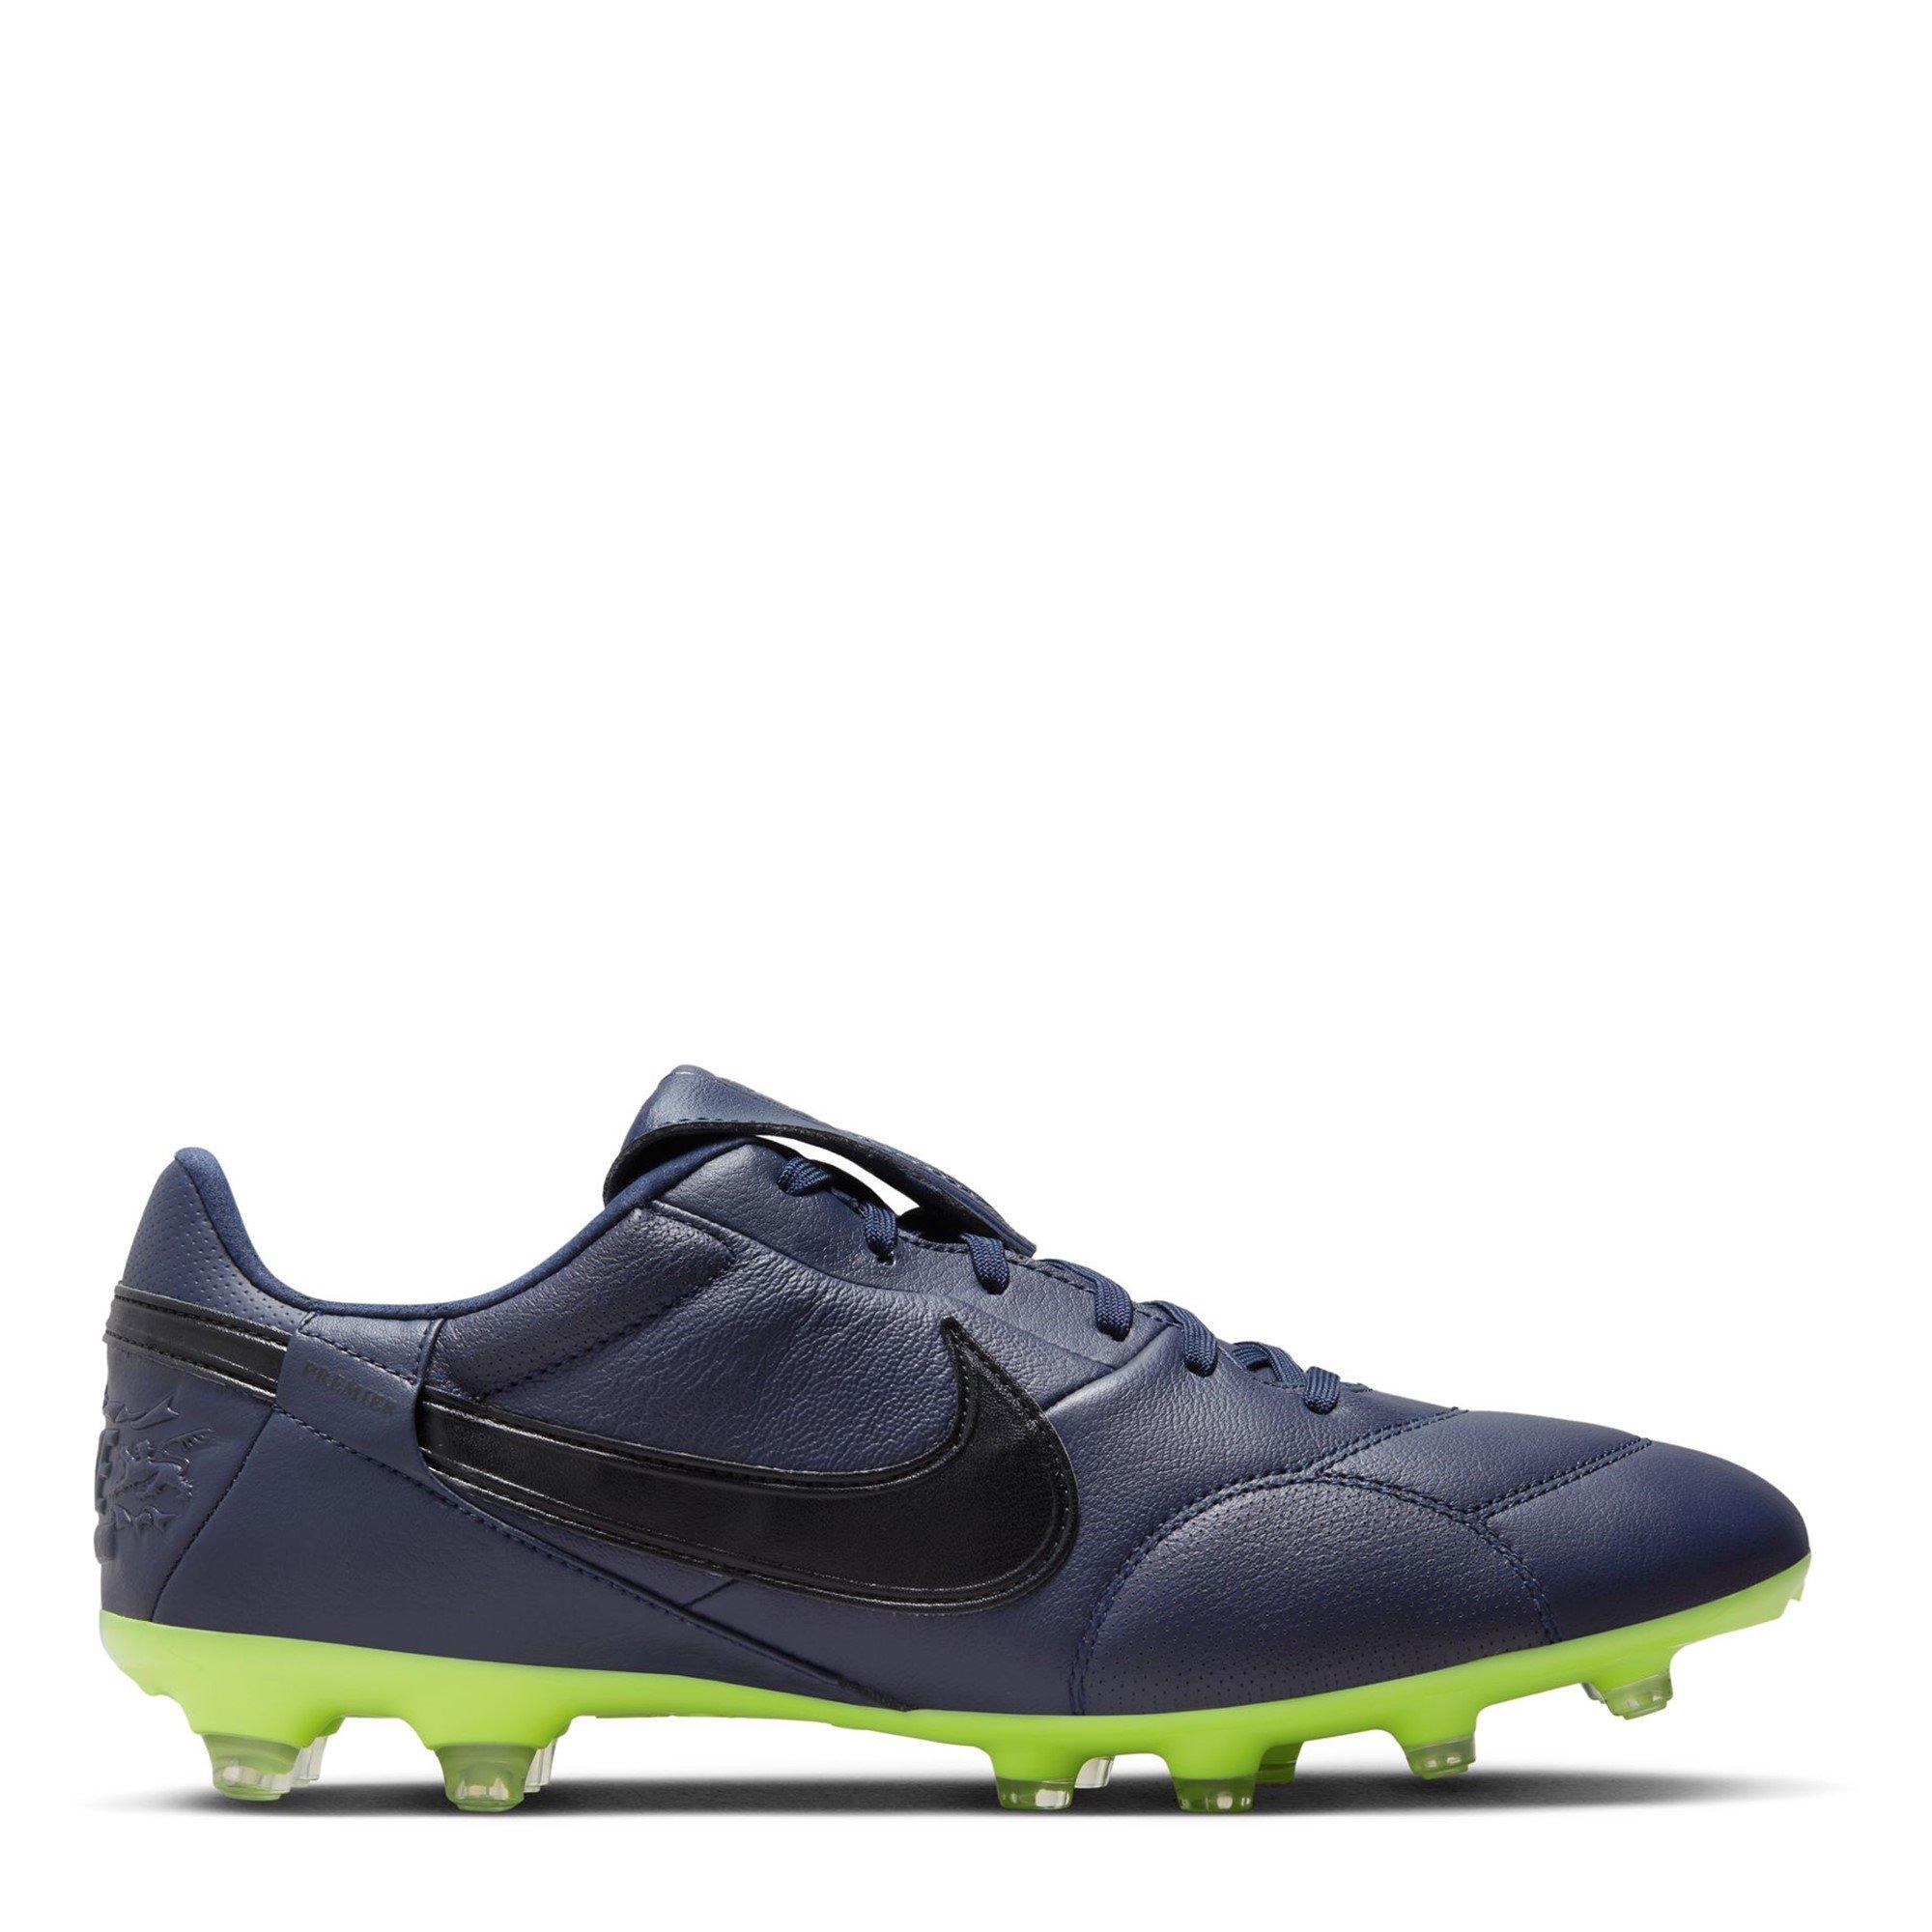 Nike | Premier III Adults Firm Ground Football Boots | Firm Ground Boots | Sports Direct MY